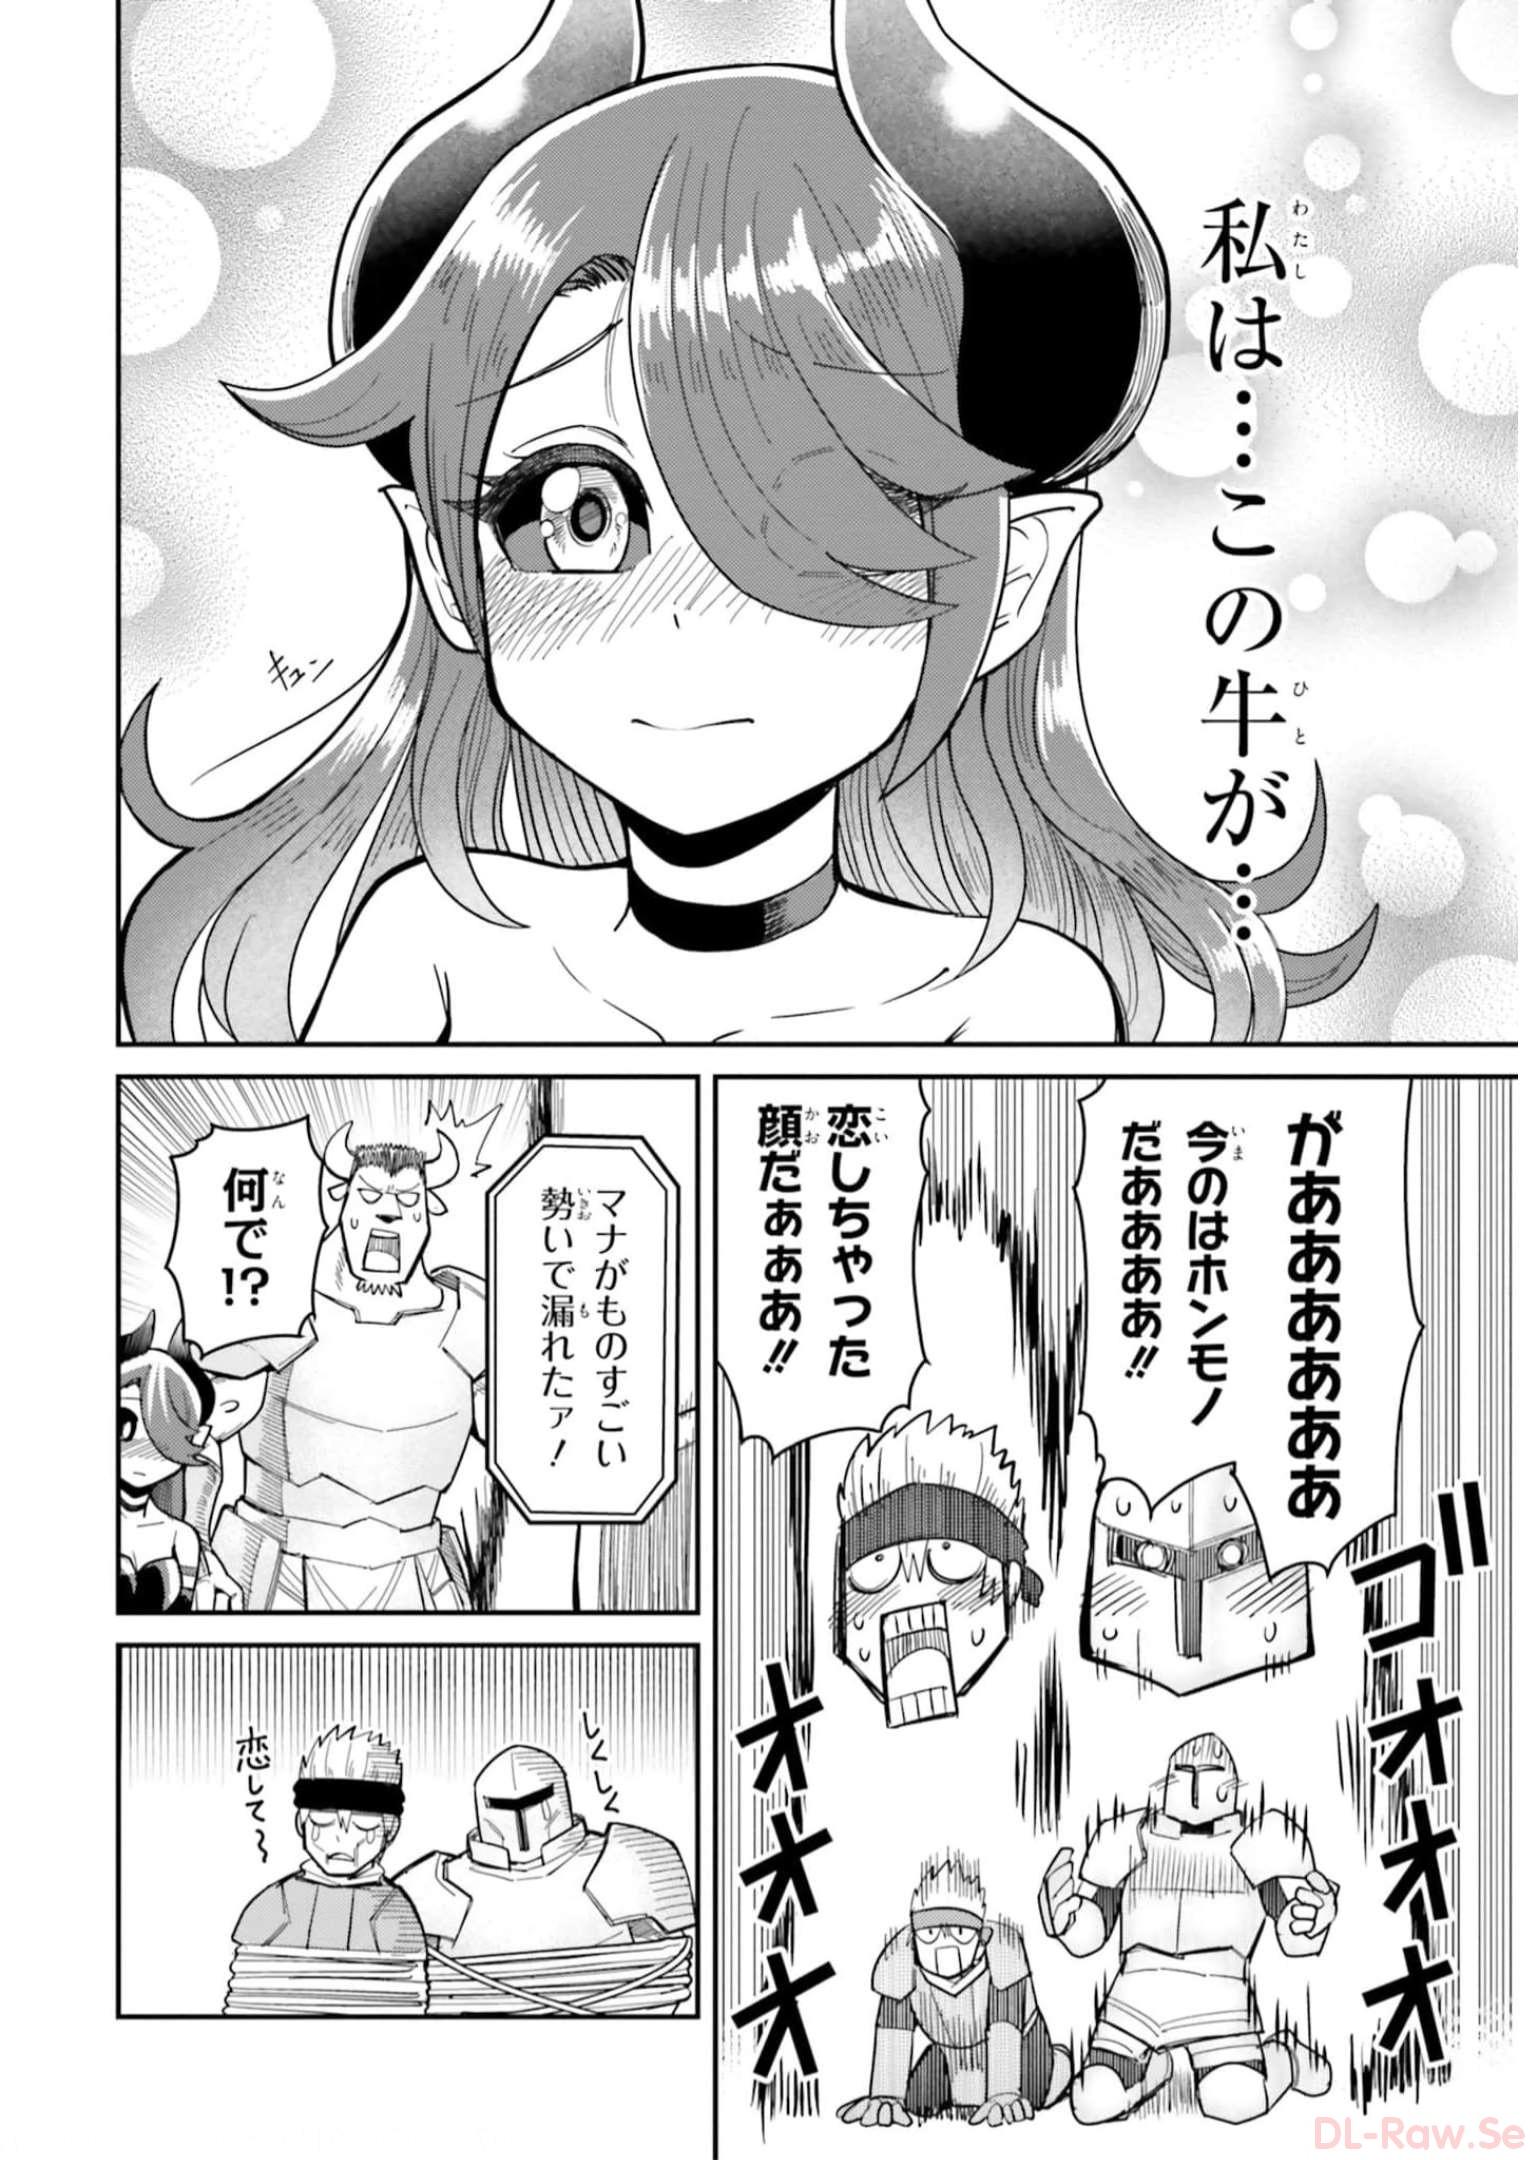 Dungeon Friends Forever Dungeon's Childhood Friend ダンジョンの幼なじみ 第20話 - Page 18